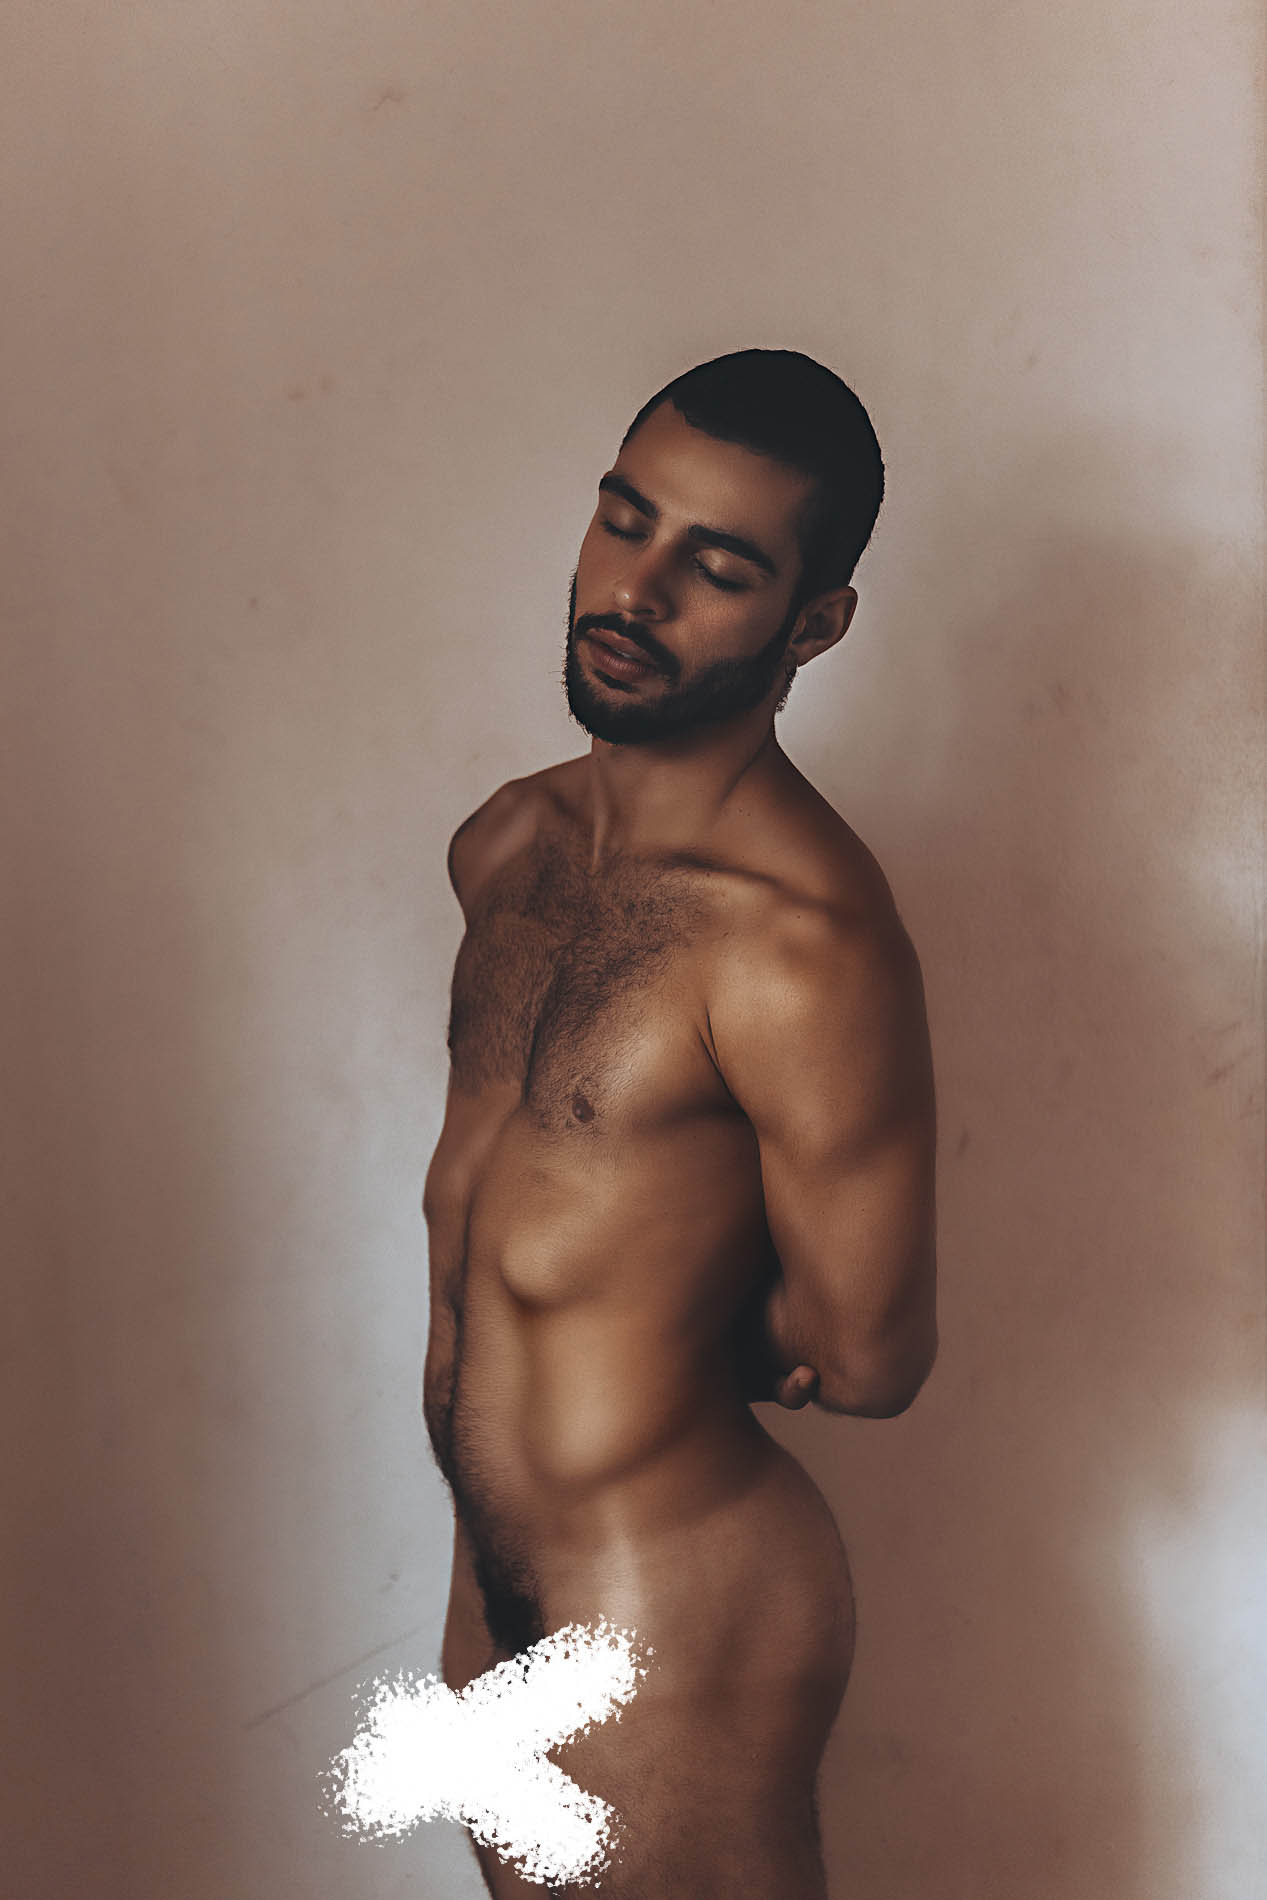 – EXCLUSIVE – Rubens by The Lonely Project.